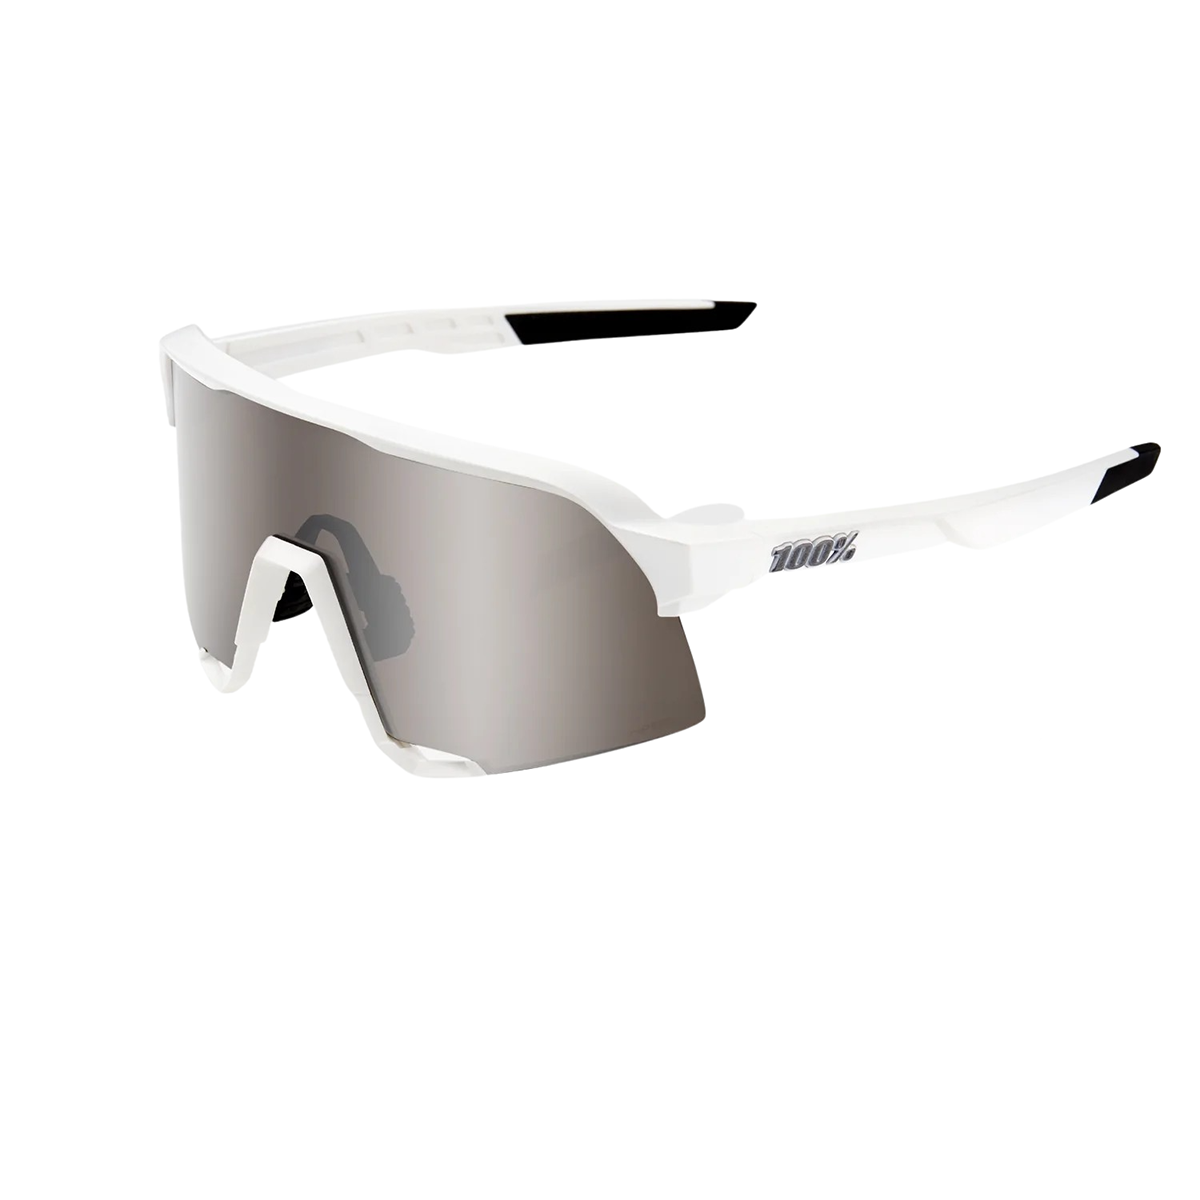 100% S3 Mirror Sunglasses, , large image number null